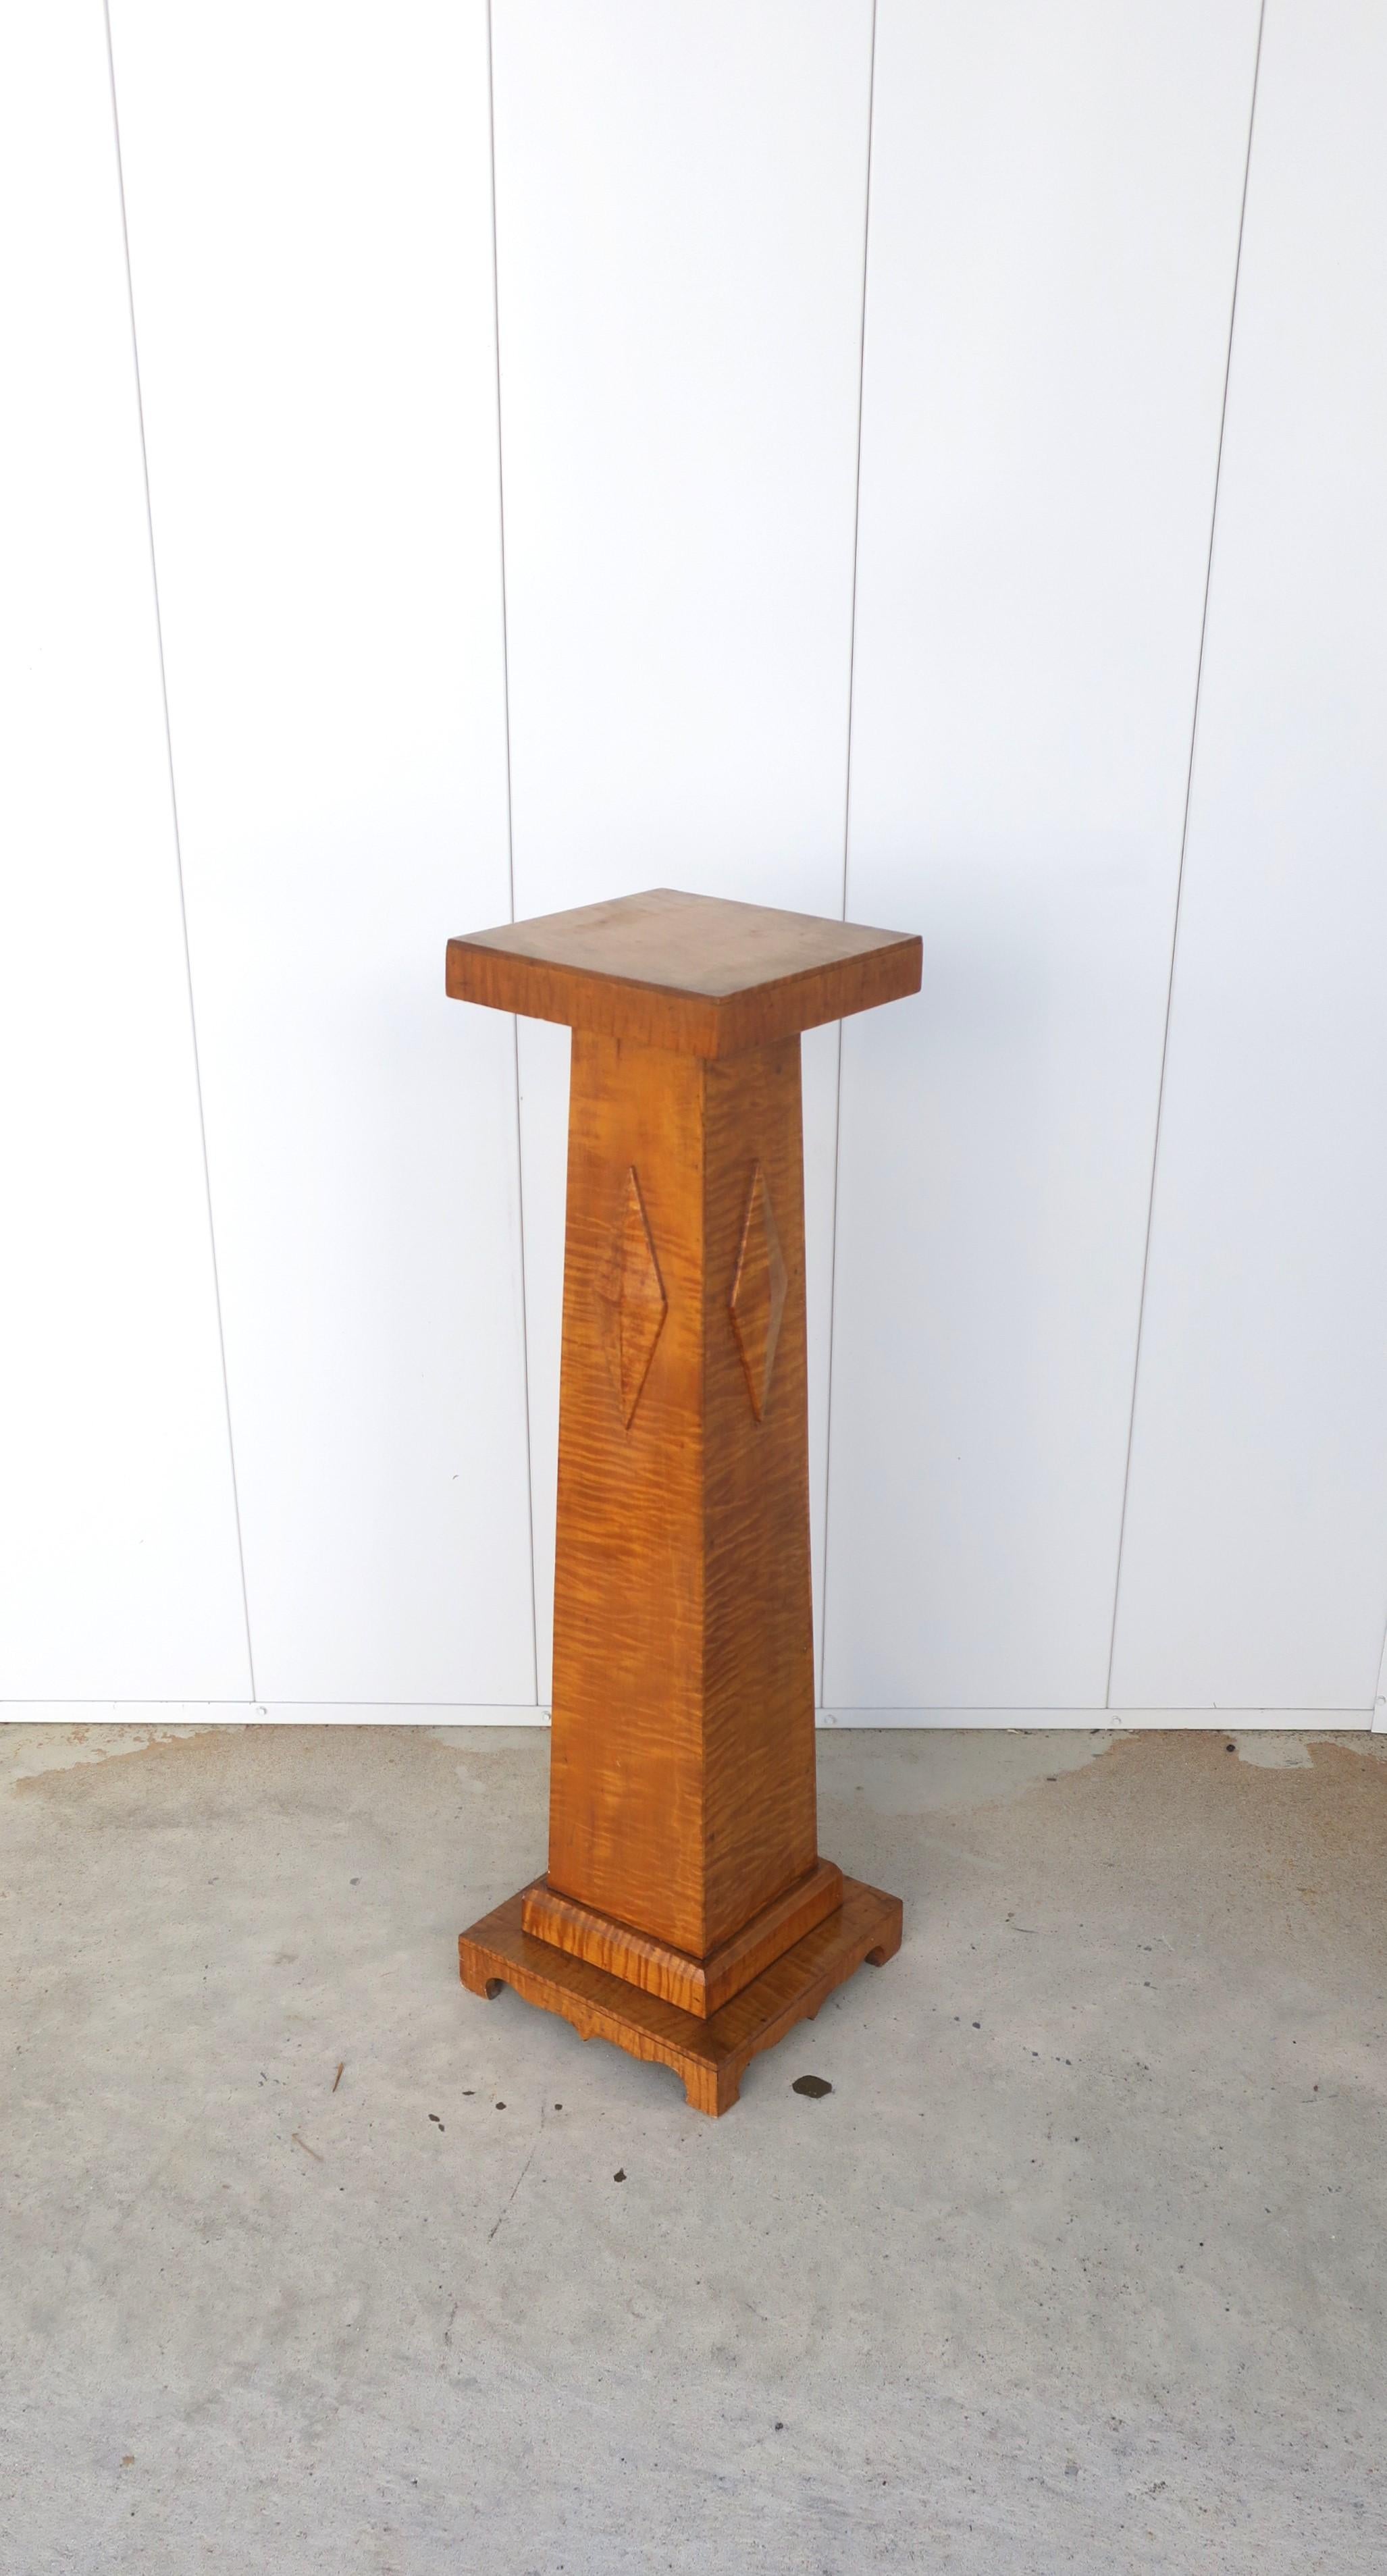 A column pedestal in tiger maple wood with diamond/marque on all four sides and a scalloped/apron design around base, circa early-20th century.

Measurements: 
37.25